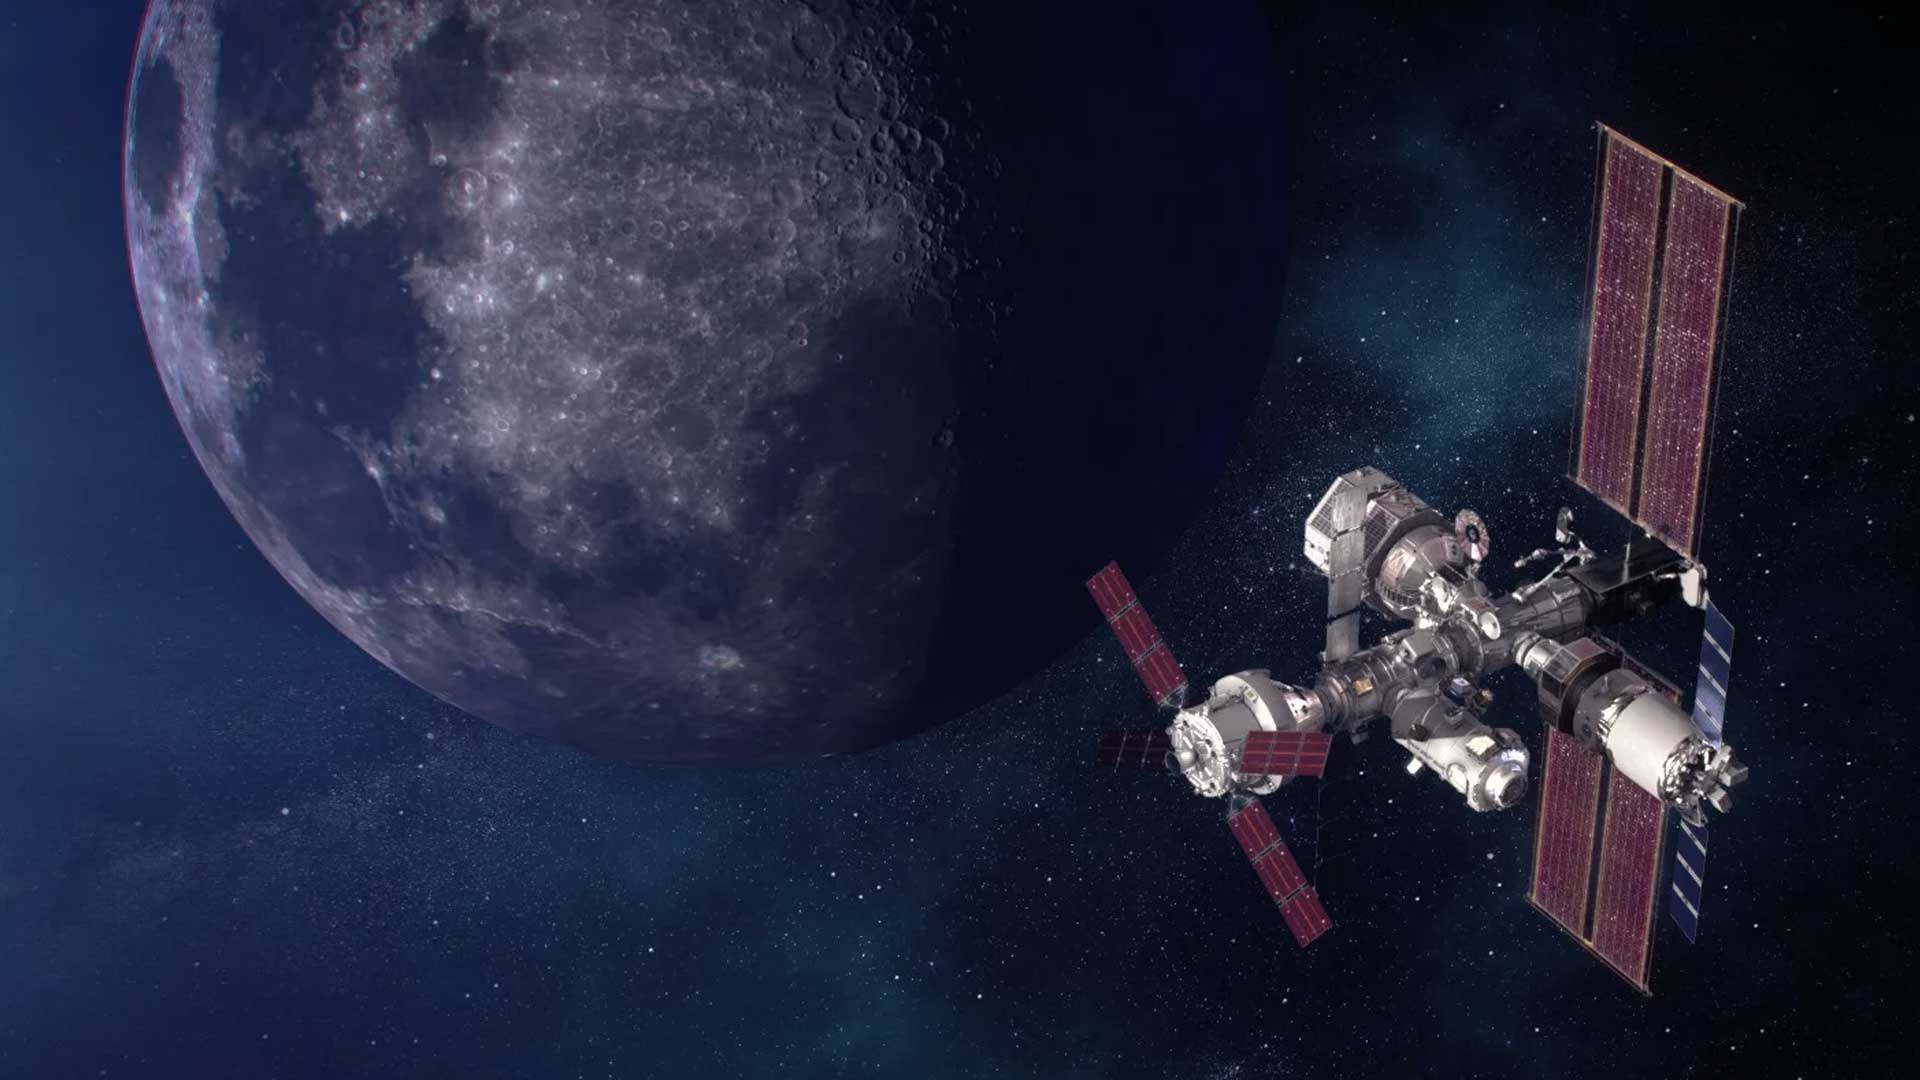 NASA has been asked to create a time zone for the moon. Here's how it would work